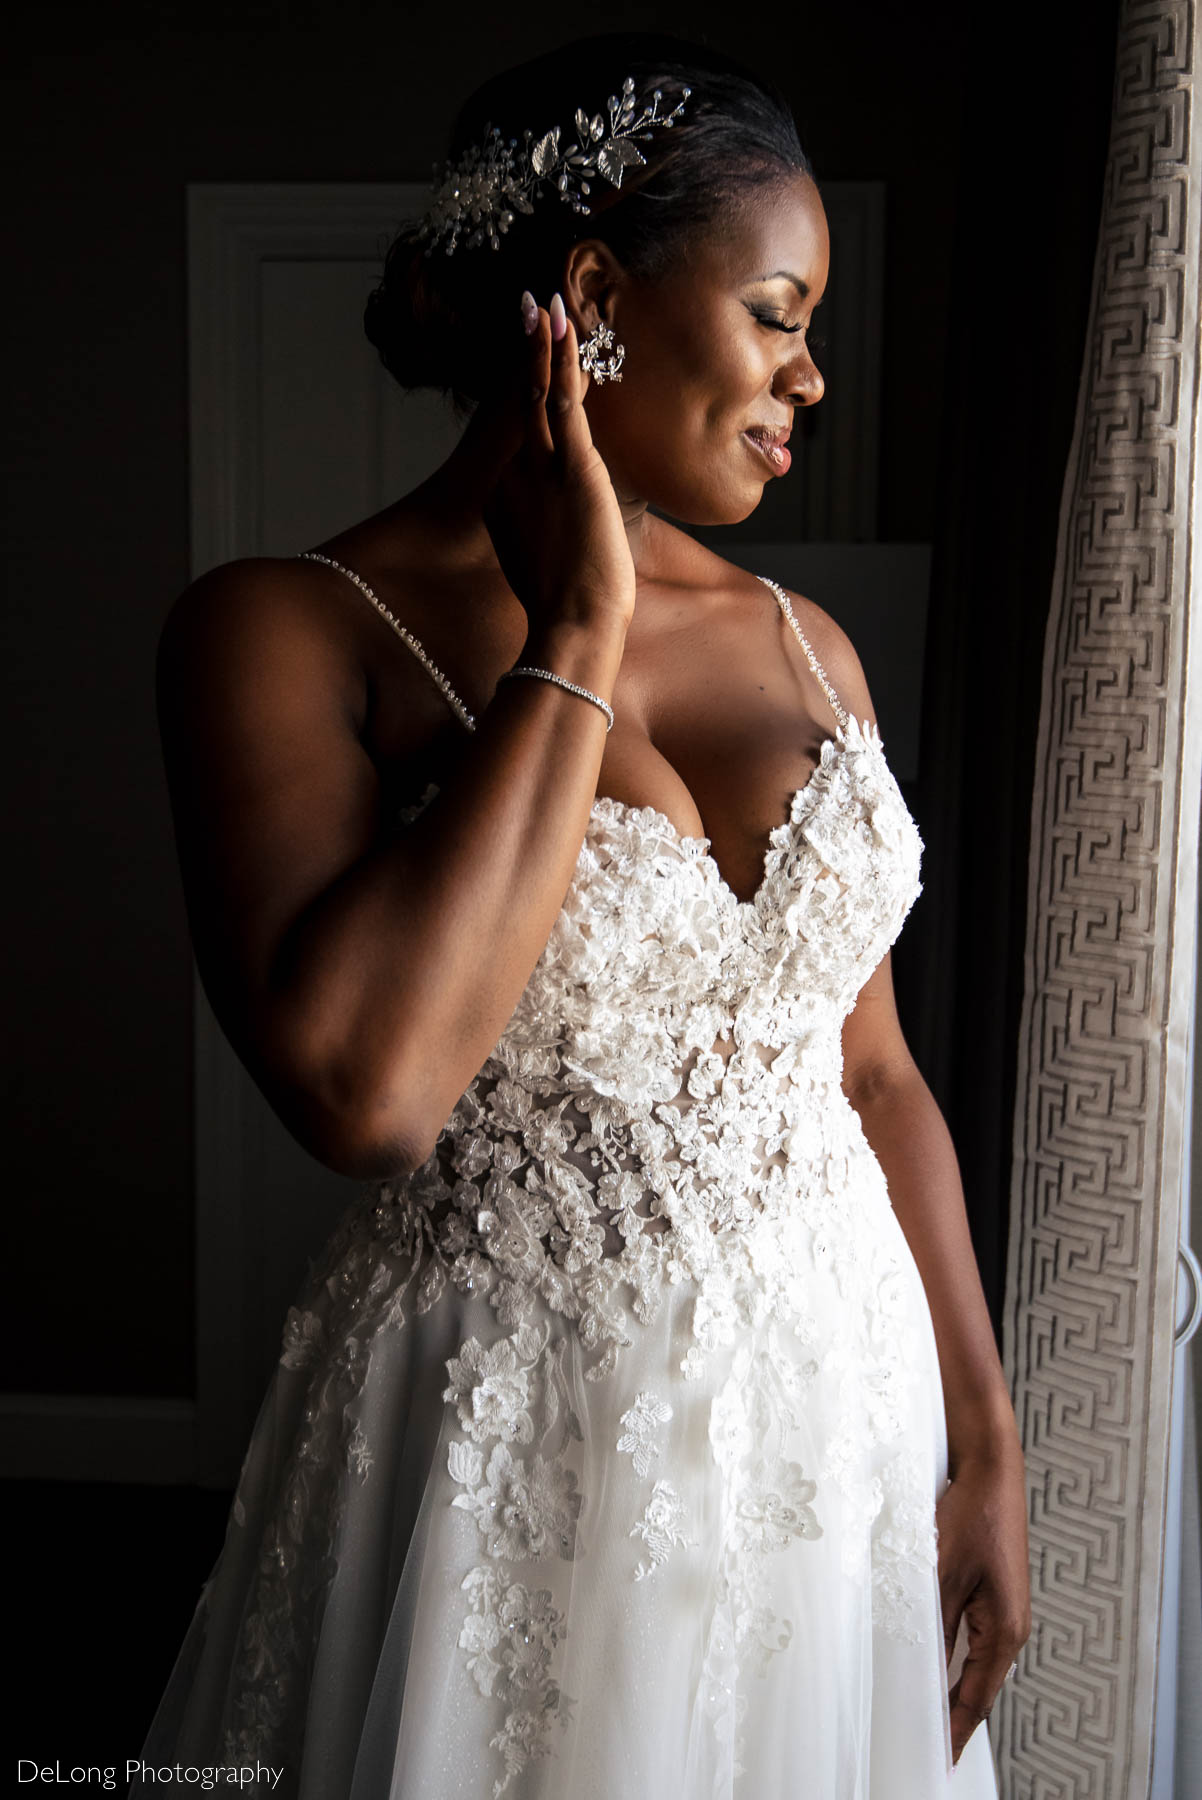 A portrait of the bride showcasing her hair piece, earrings and the appliqués on the bodice of her wedding dress at the Ballantyne Hotel by Charlotte wedding photographers DeLong Photography